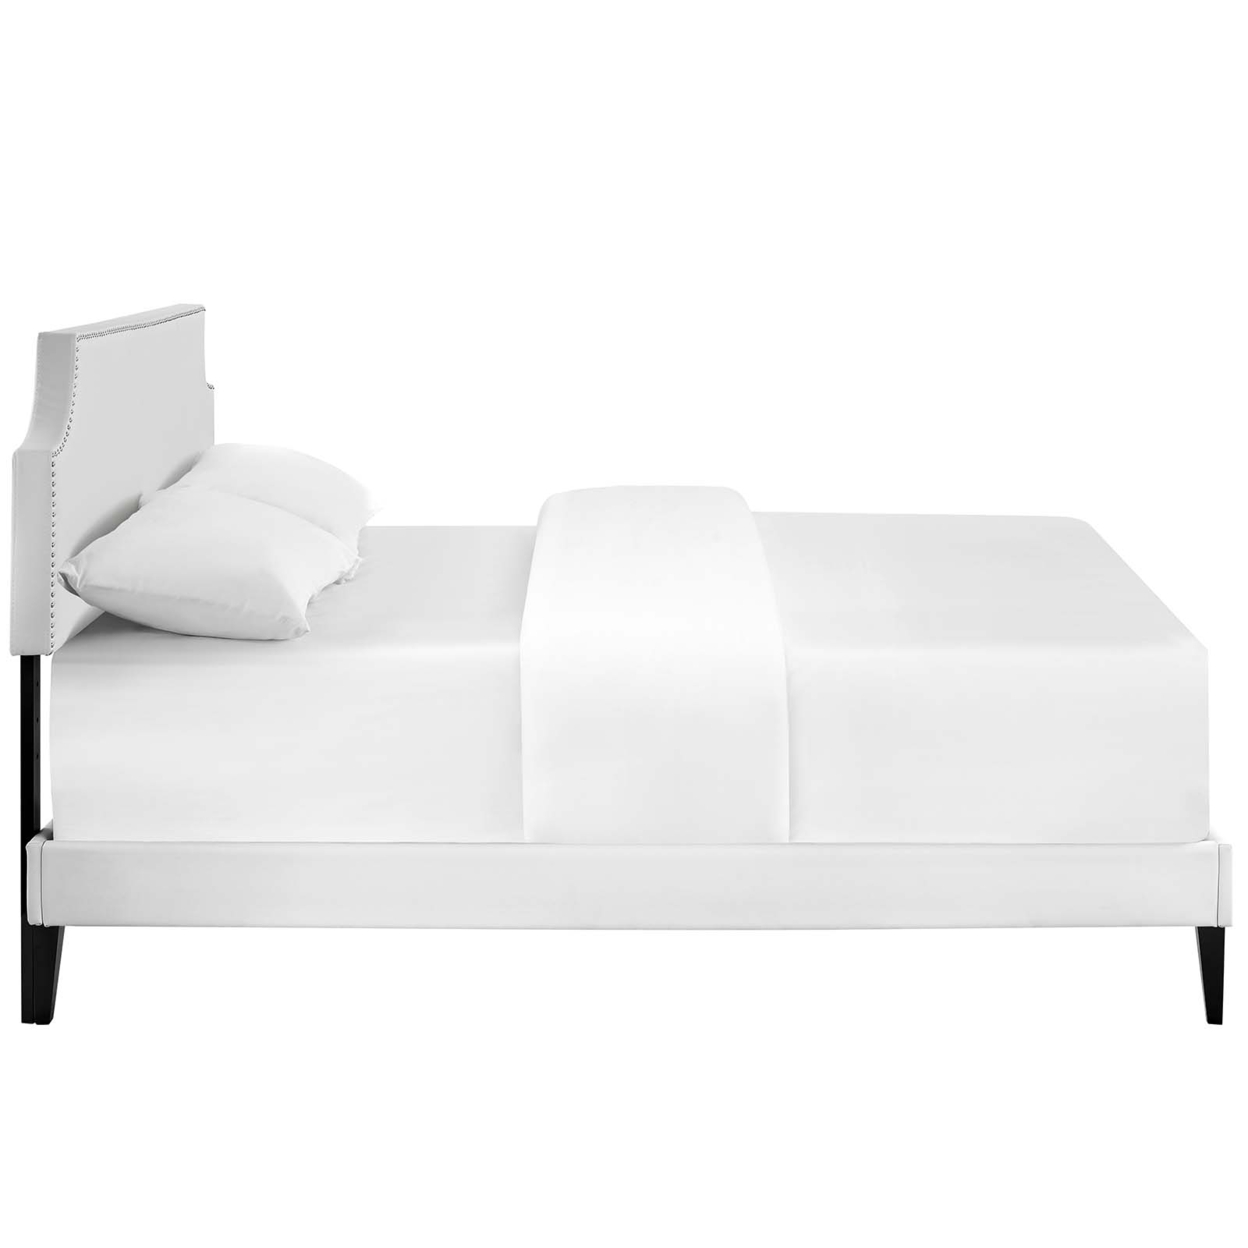 Corene Queen Vinyl Platform Bed With Squared Tapered Legs, White